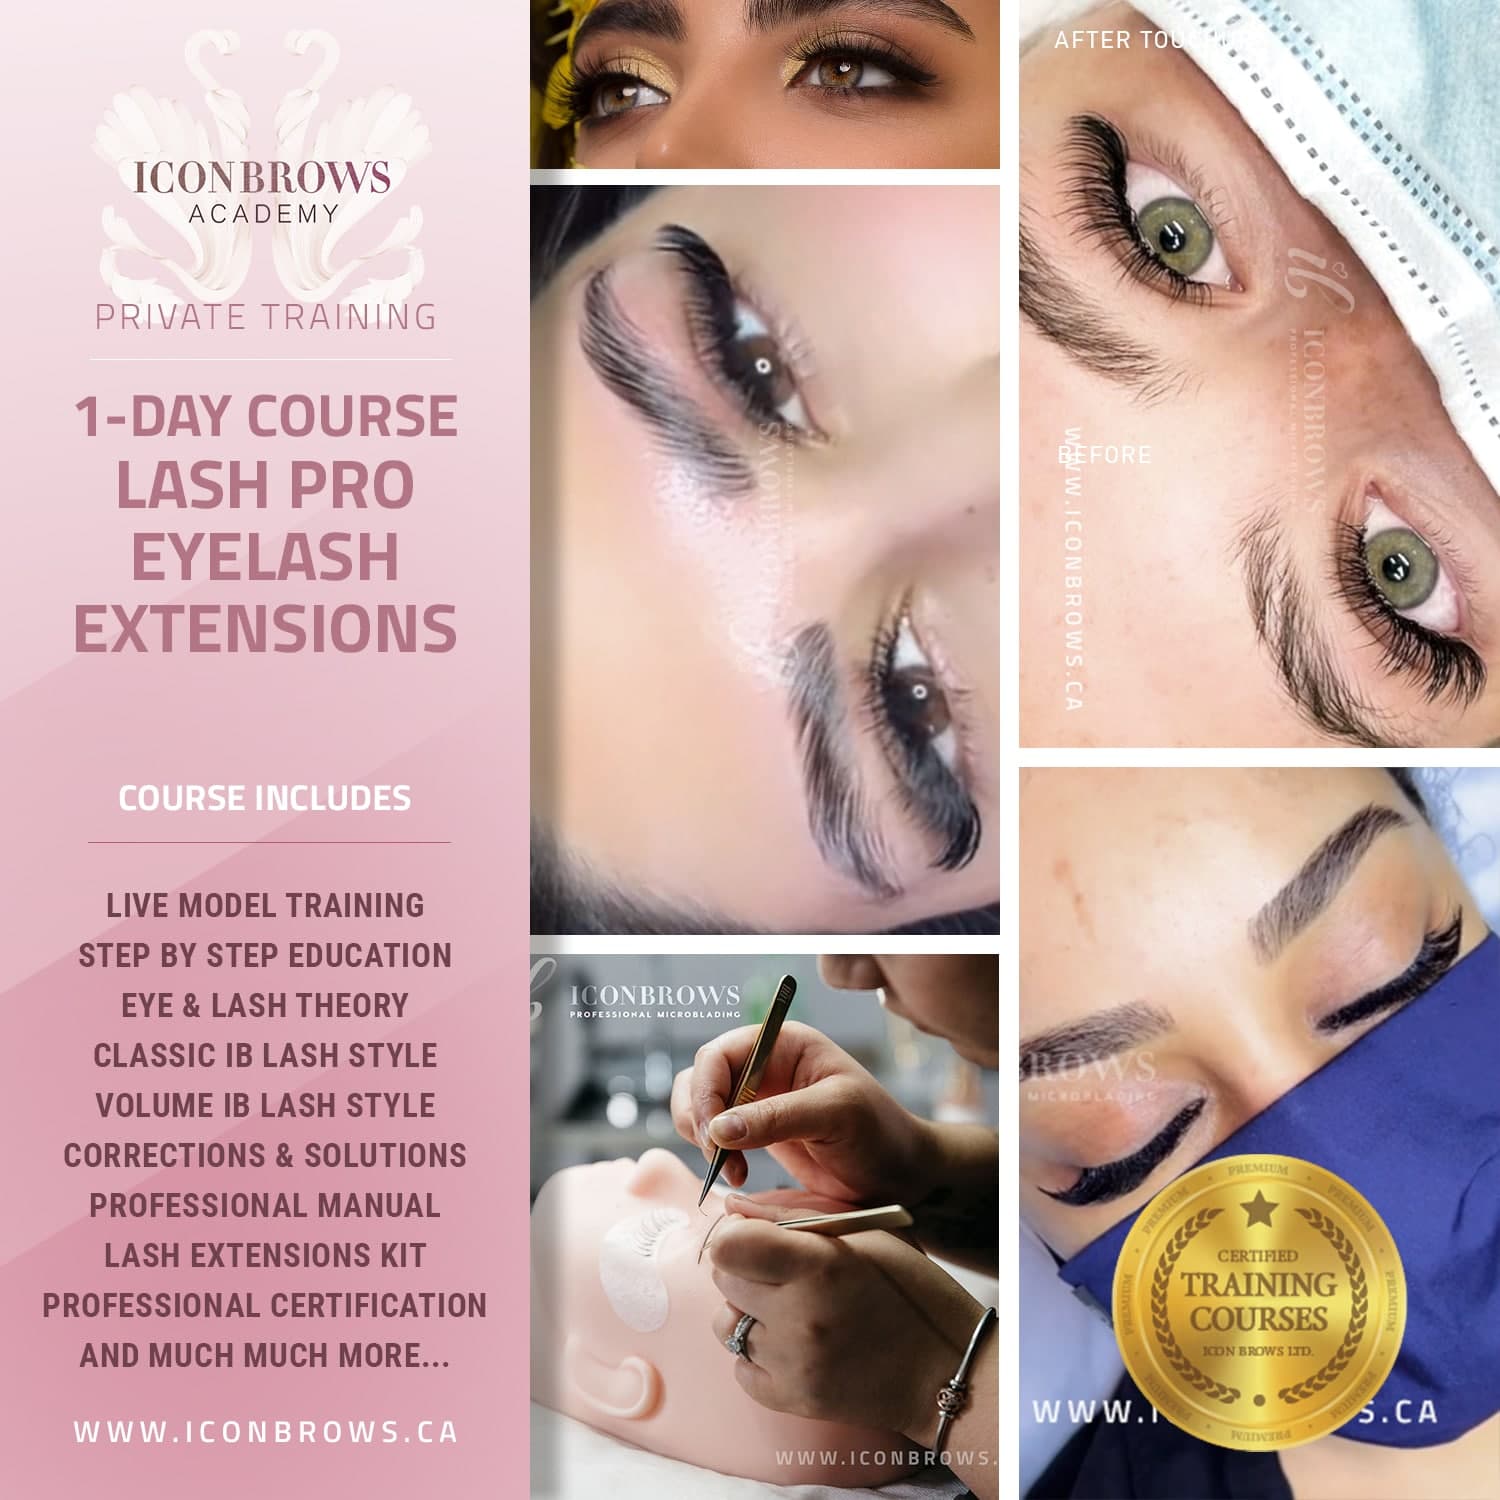 Threading Training Course with Iconbrows Academy Toronto's Top Brow & Lash Training Courses